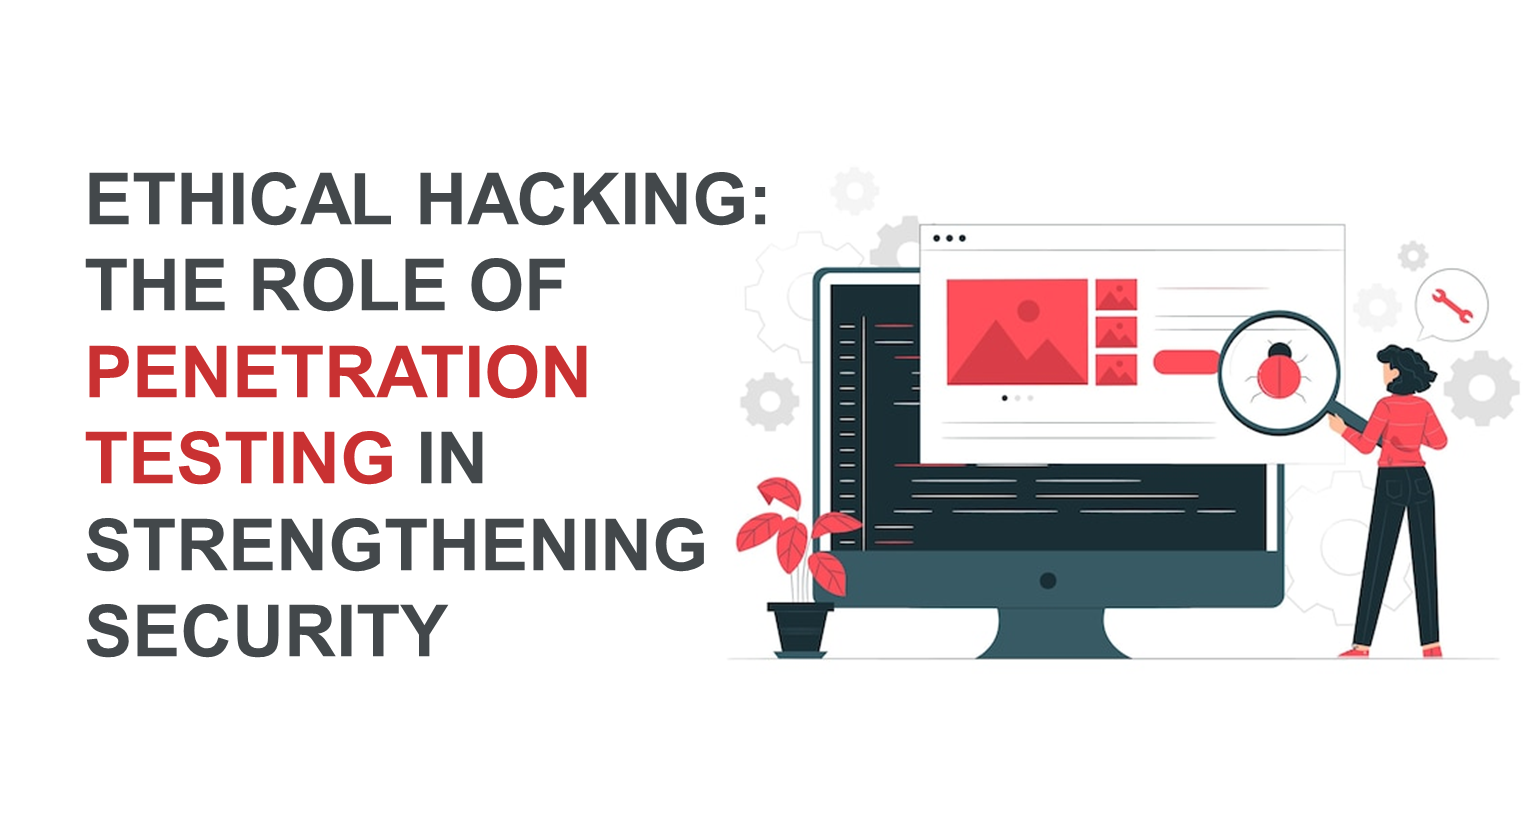 Ethical Hacking: The Role of Penetration Testing in Strengthening Security